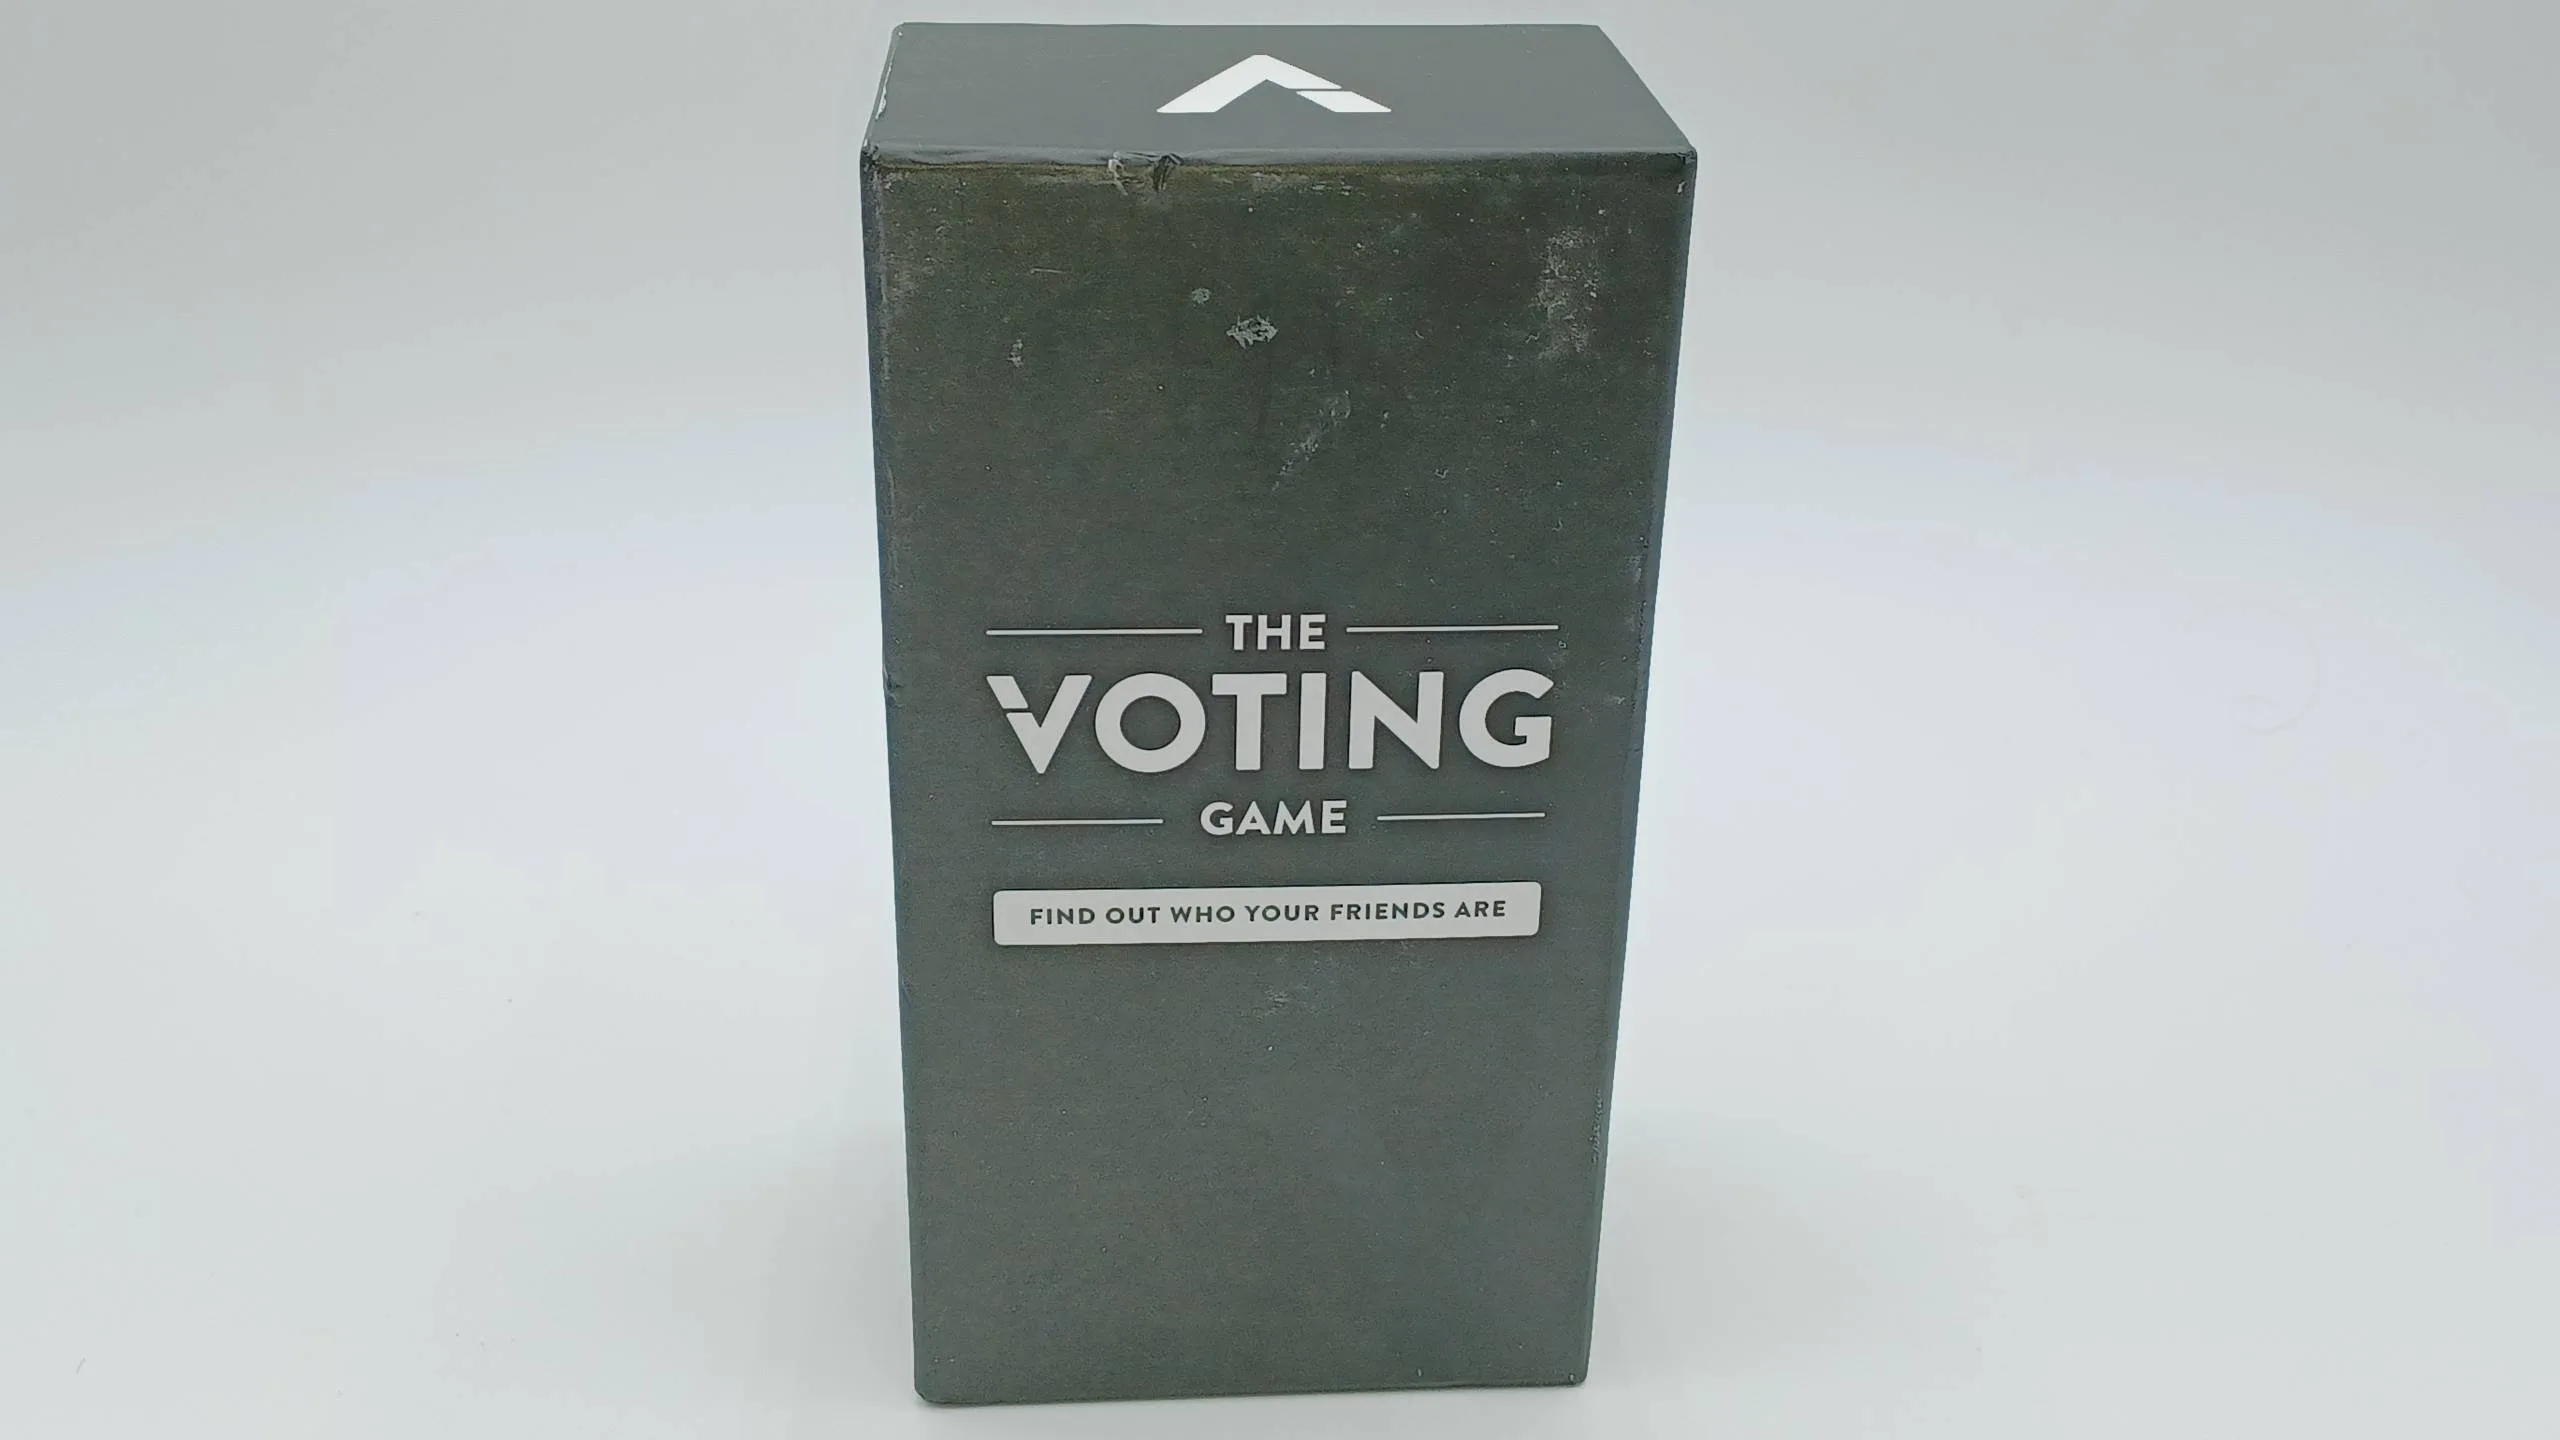 Box for The Voting Game